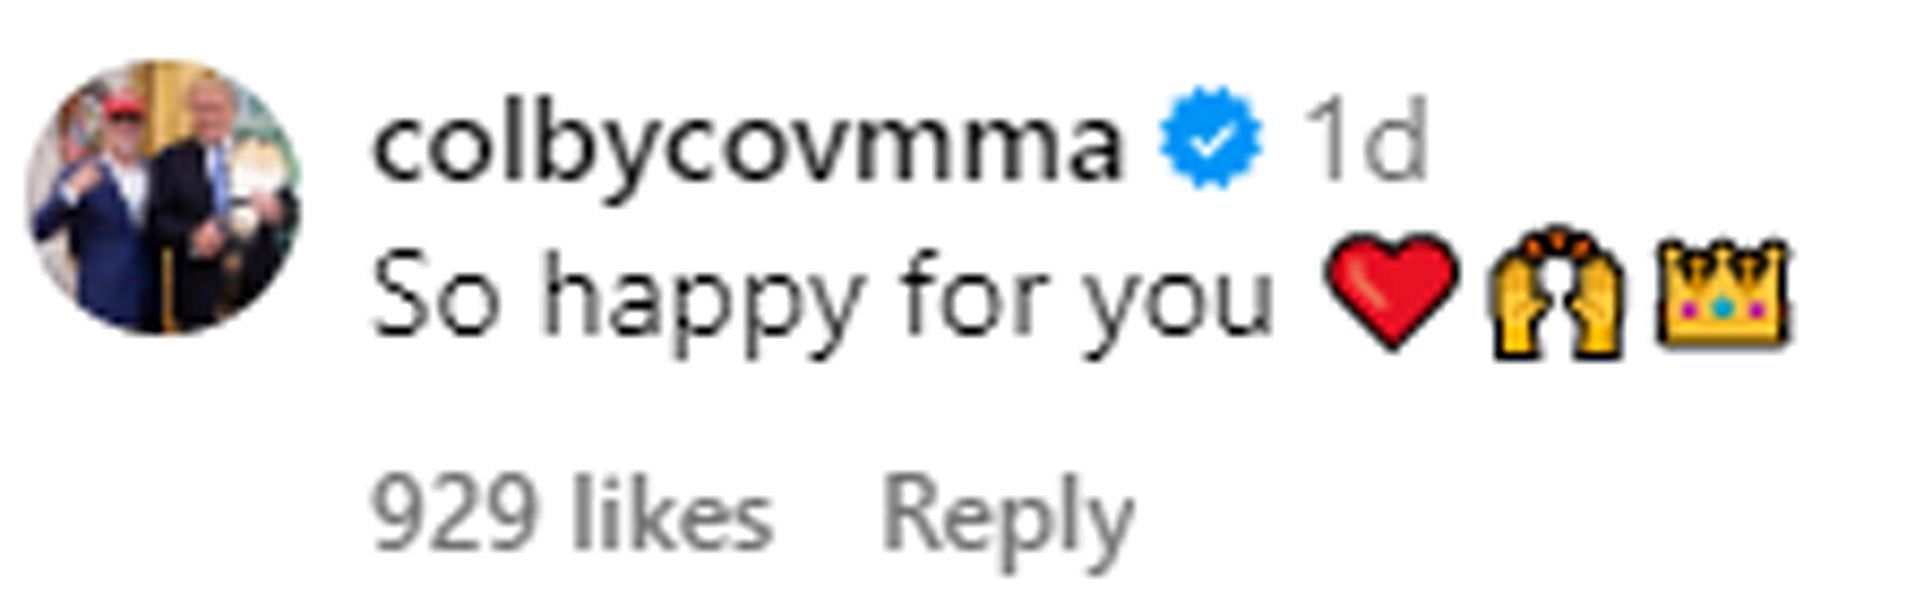 Covington&#039;s comment on Zhang Weili&#039;s Instagram post